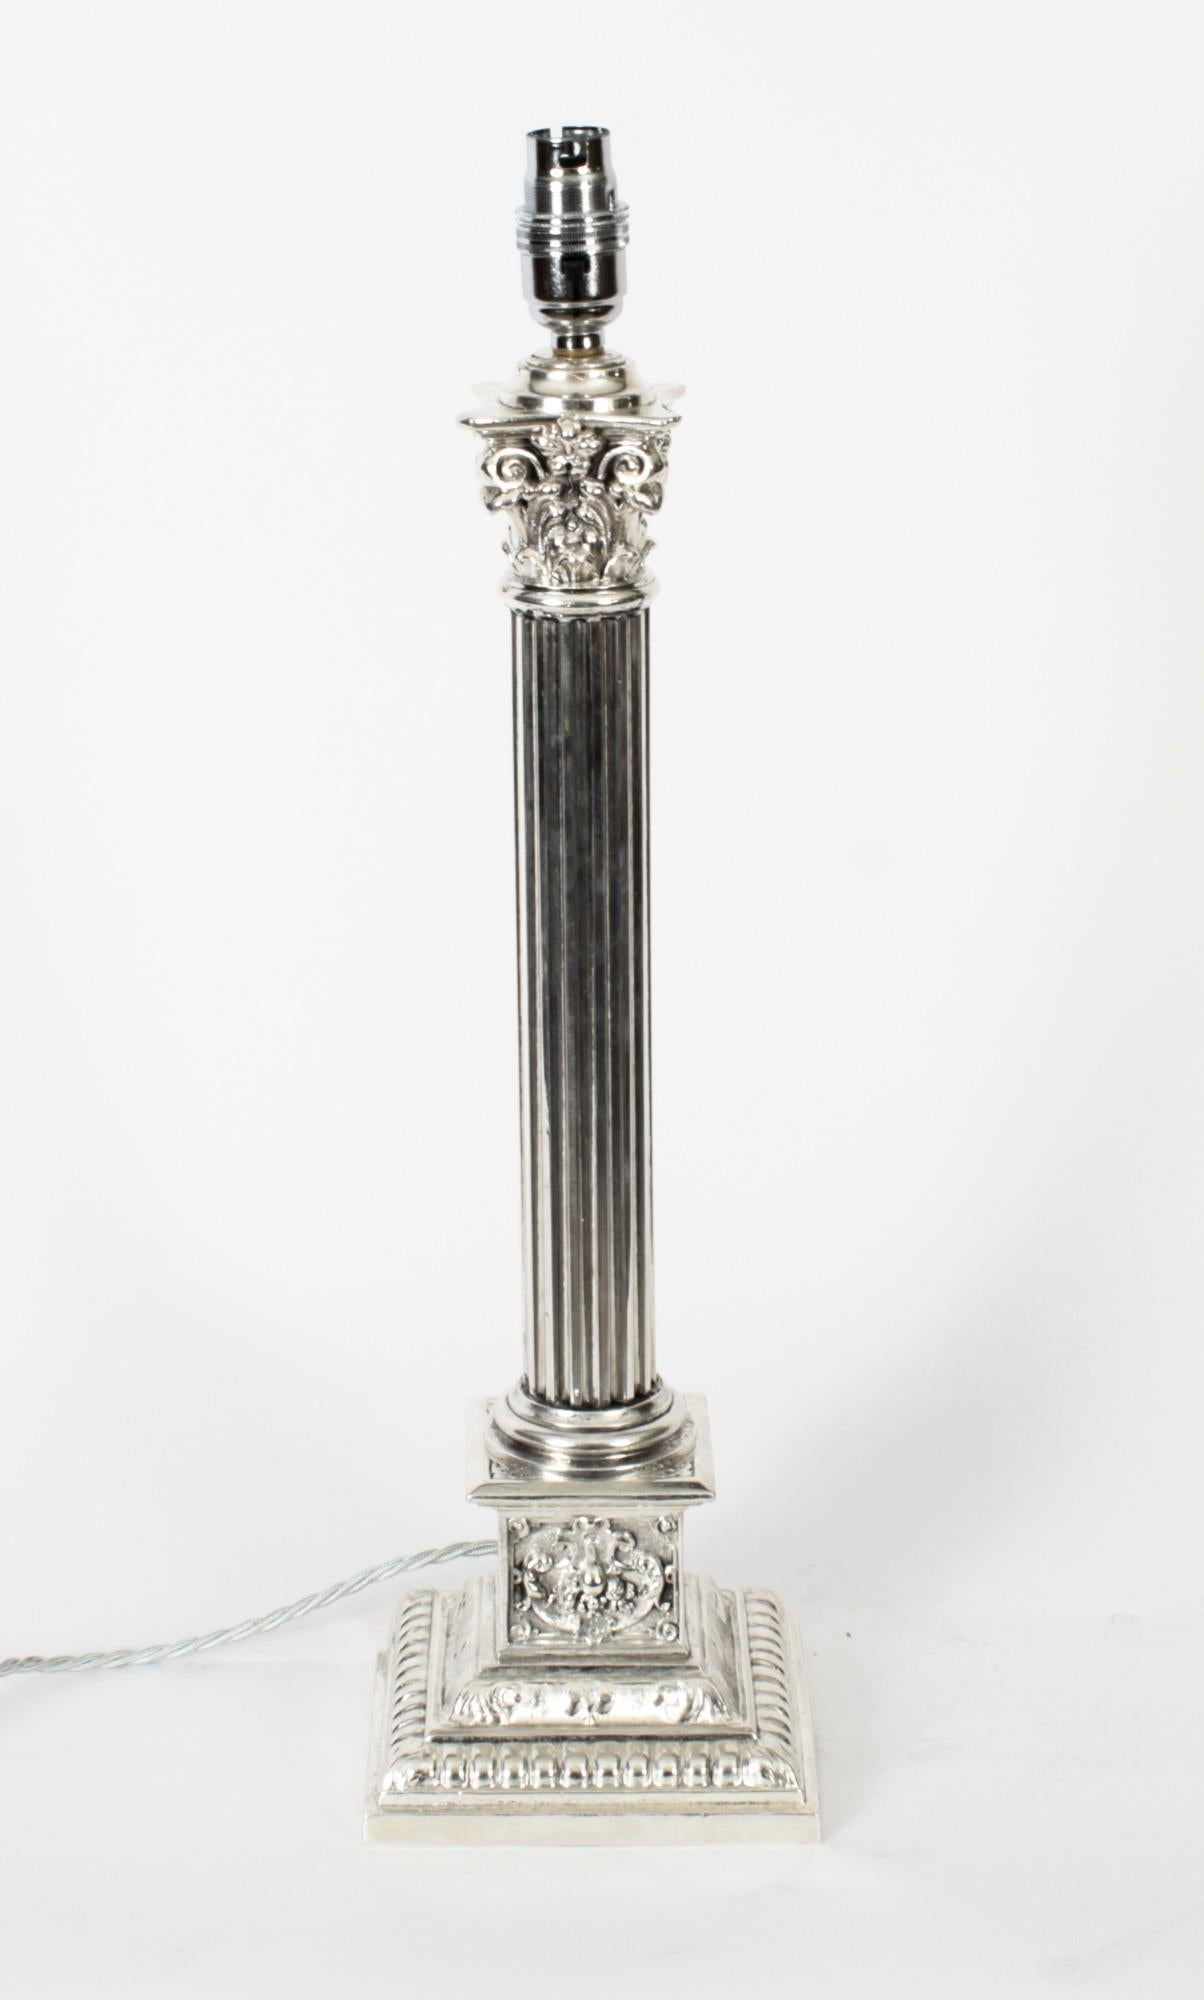 This is a splendid antique Victorian silver-plated Corinthian column table lamp now converted to electricity, late 19th century in date.
 
This opulent antique table lamp features a Corinthian Capital decorated with classical ornate foliage in the